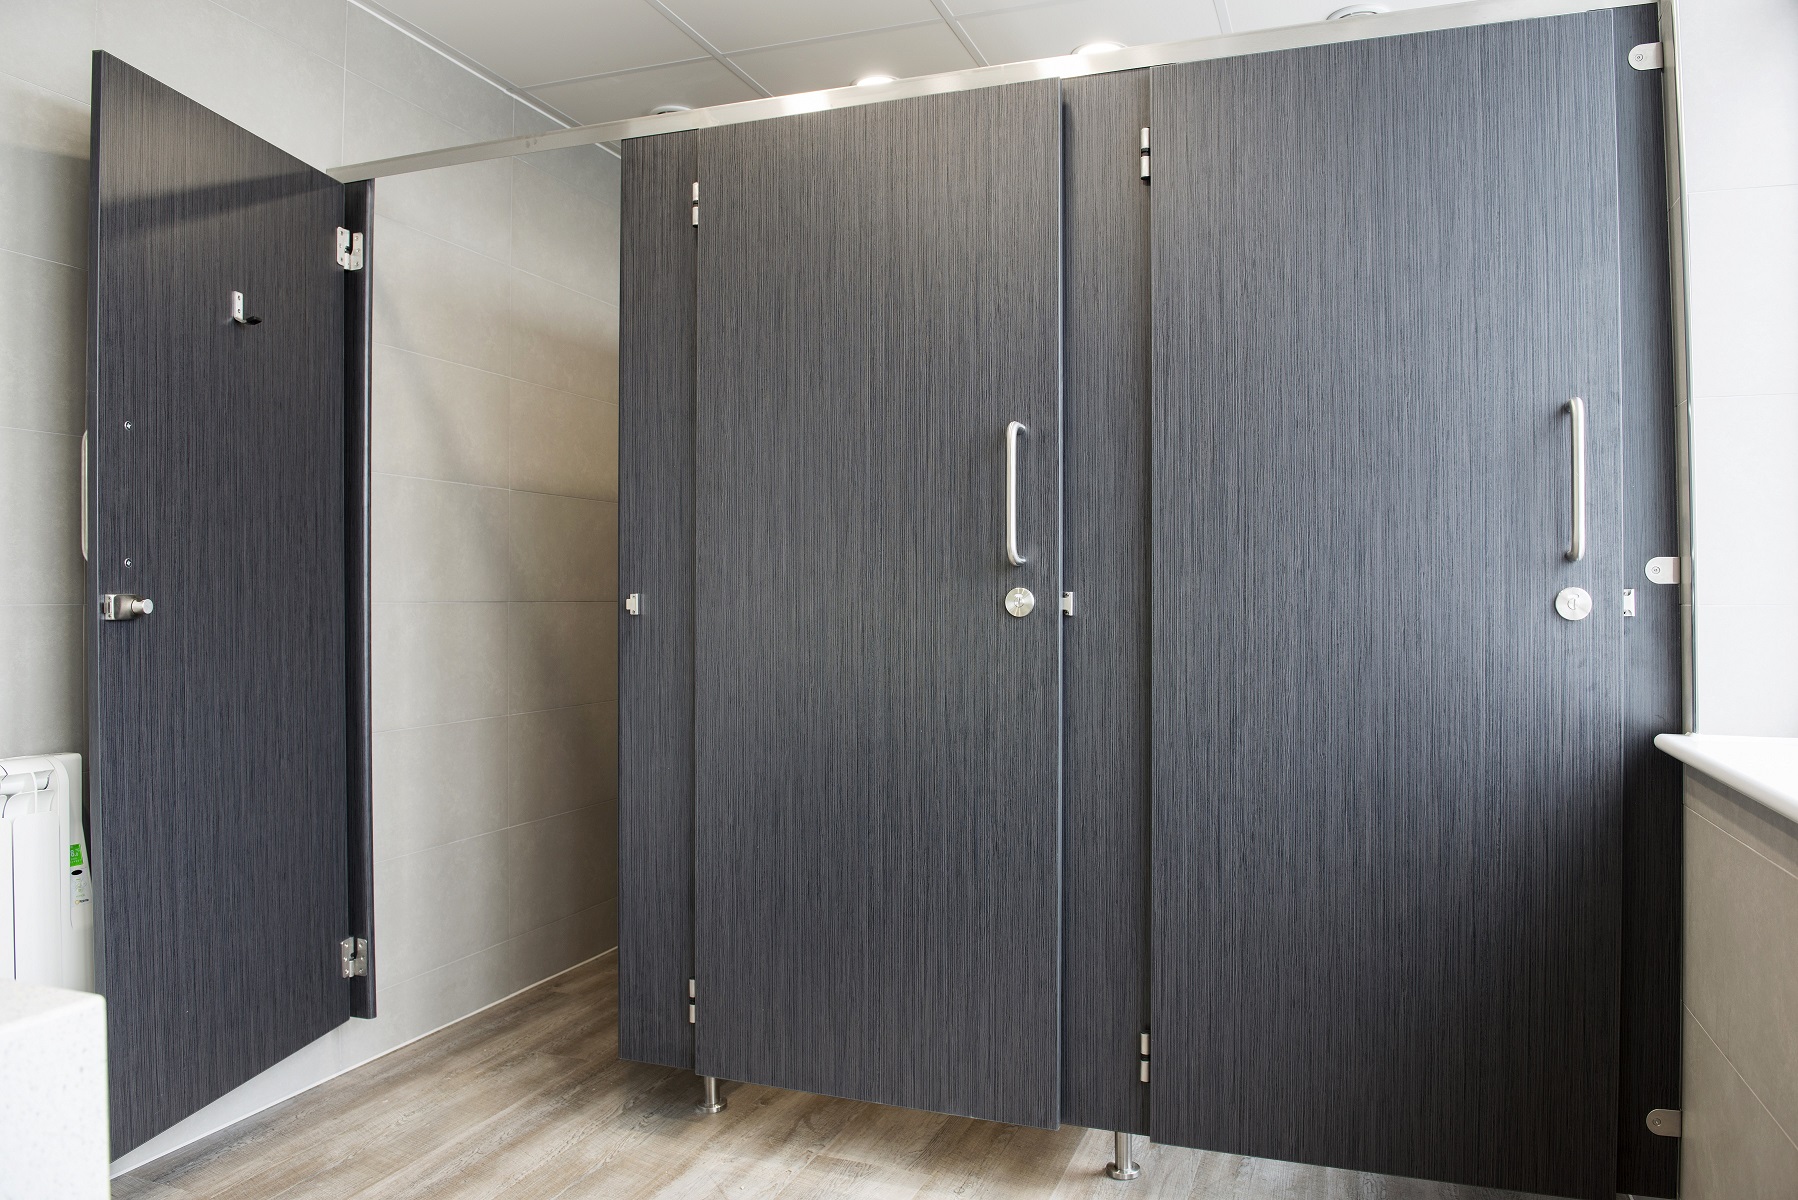 Toilet Cubicles: What is the Right Material for me?